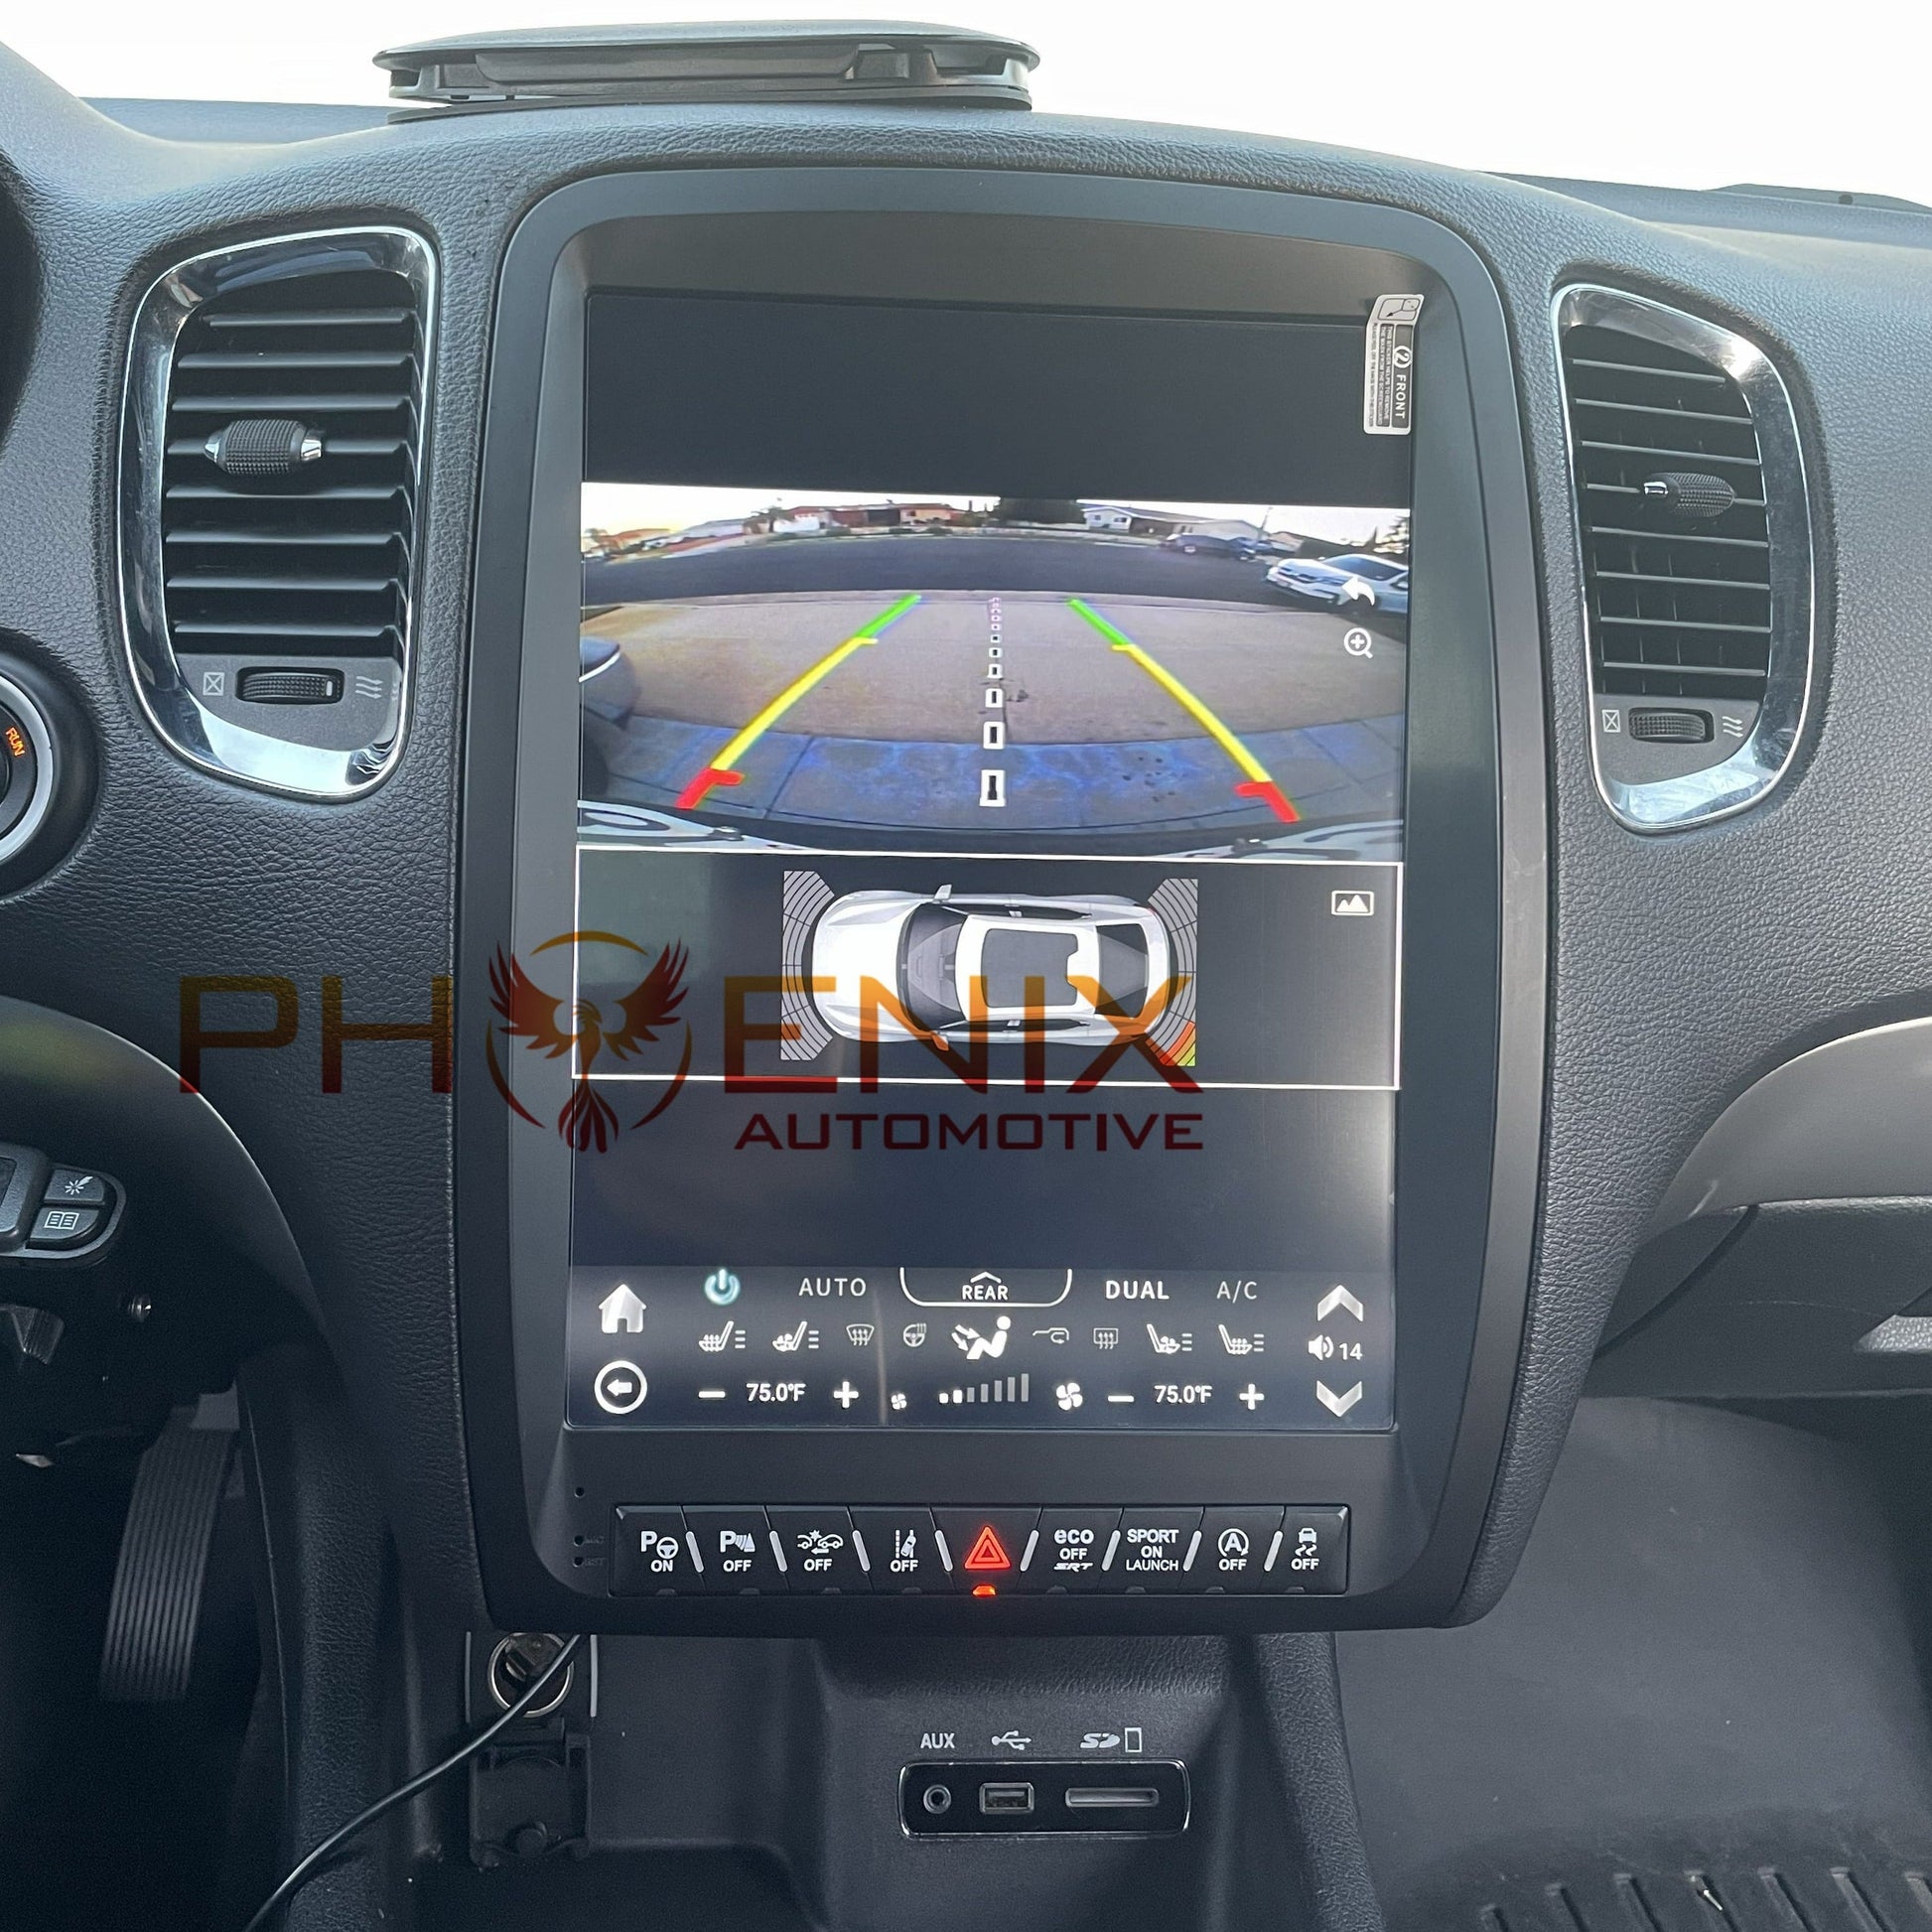 [Open box] 13” Android 10/12 Vertical Screen Navigation Radio for Dodge Durango 2011 - 2020